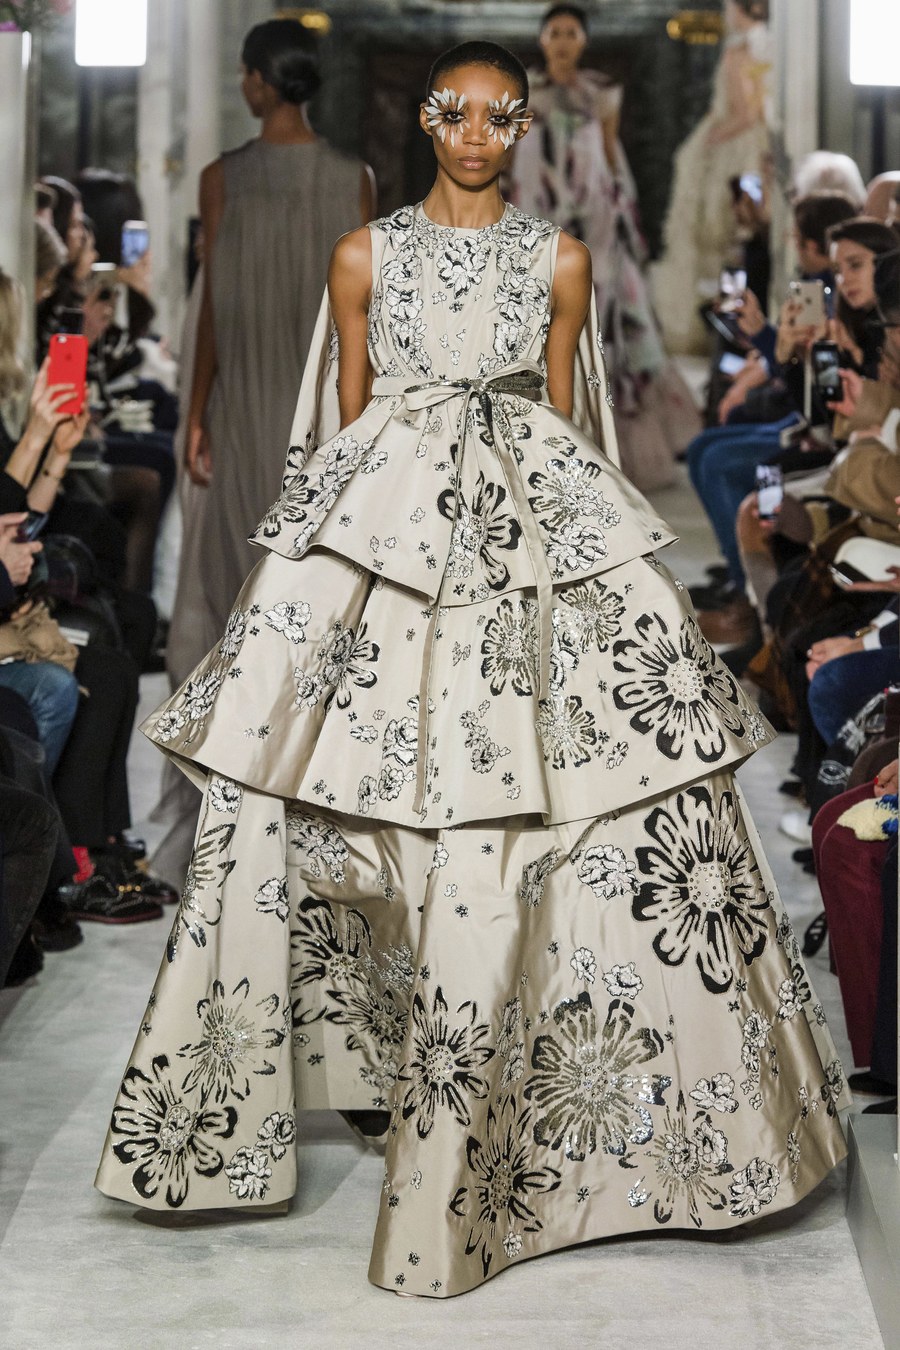 Valentino Spring 2019 Haute Couture: at its | Plume